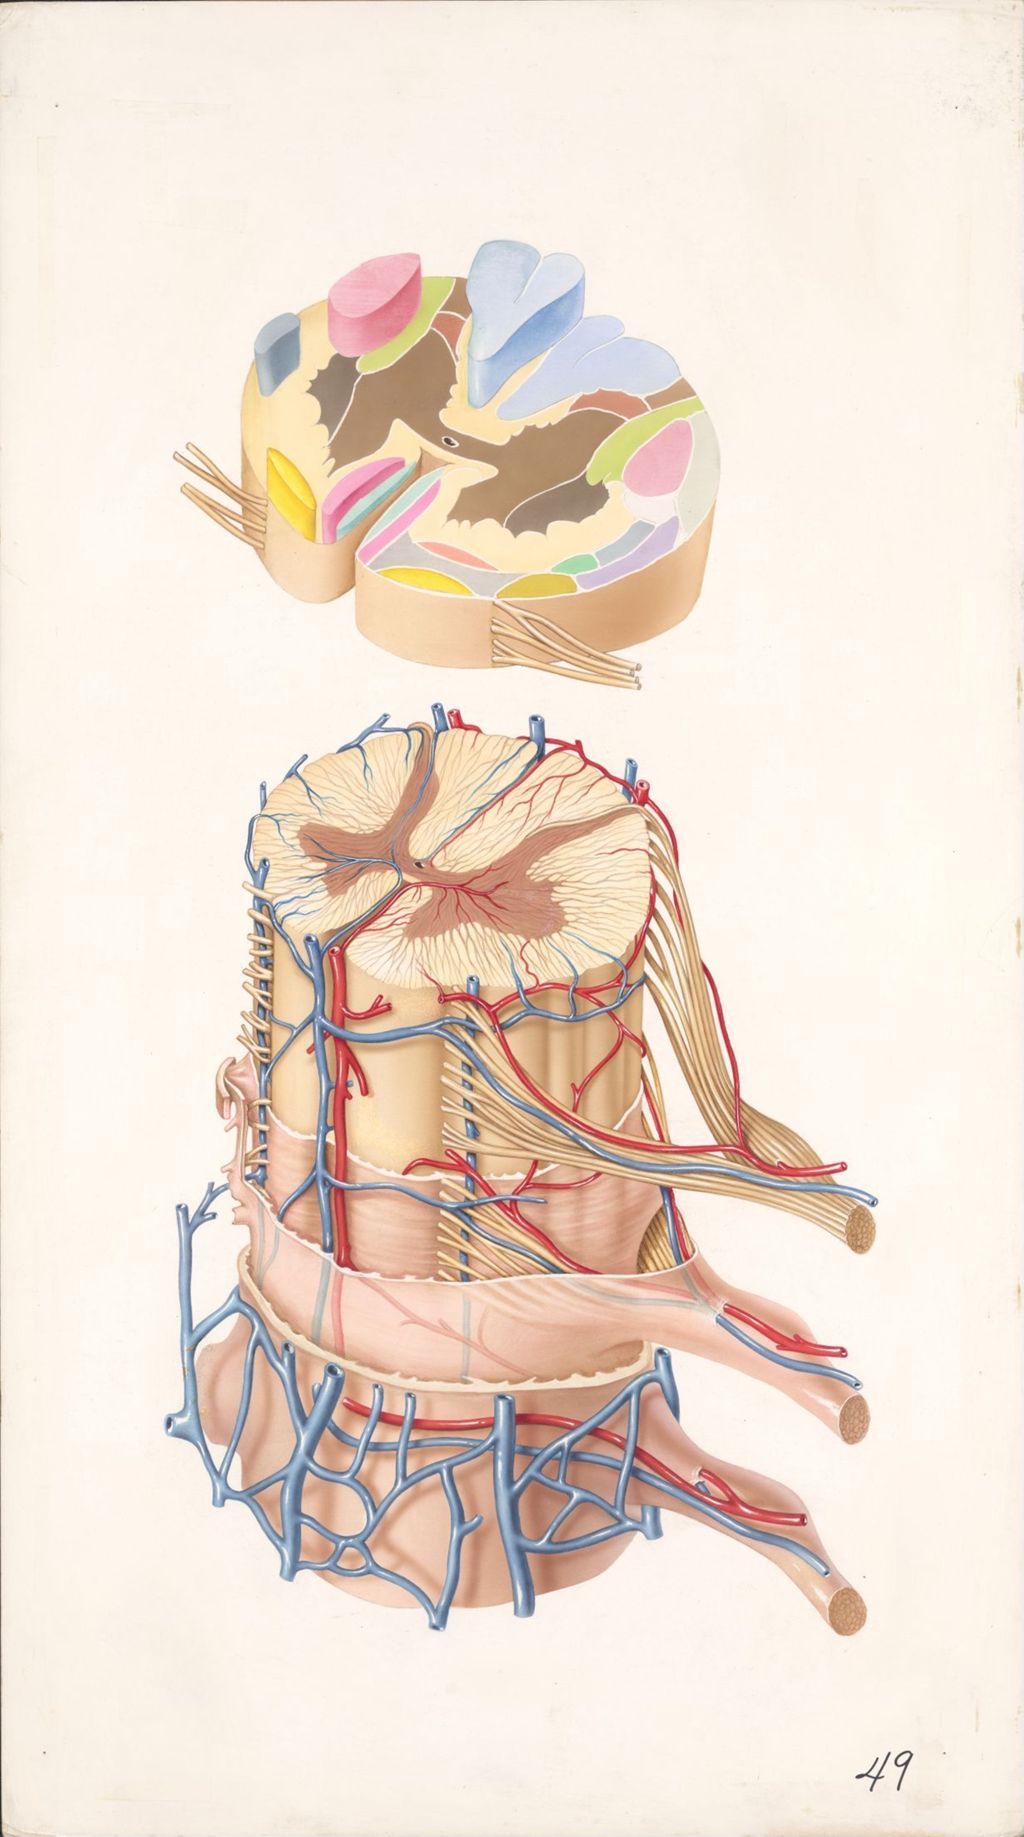 Medical Profiles, Striatan, Important Nerve Tracts of the Spinal Cord and Anatomy of Spinal Cord